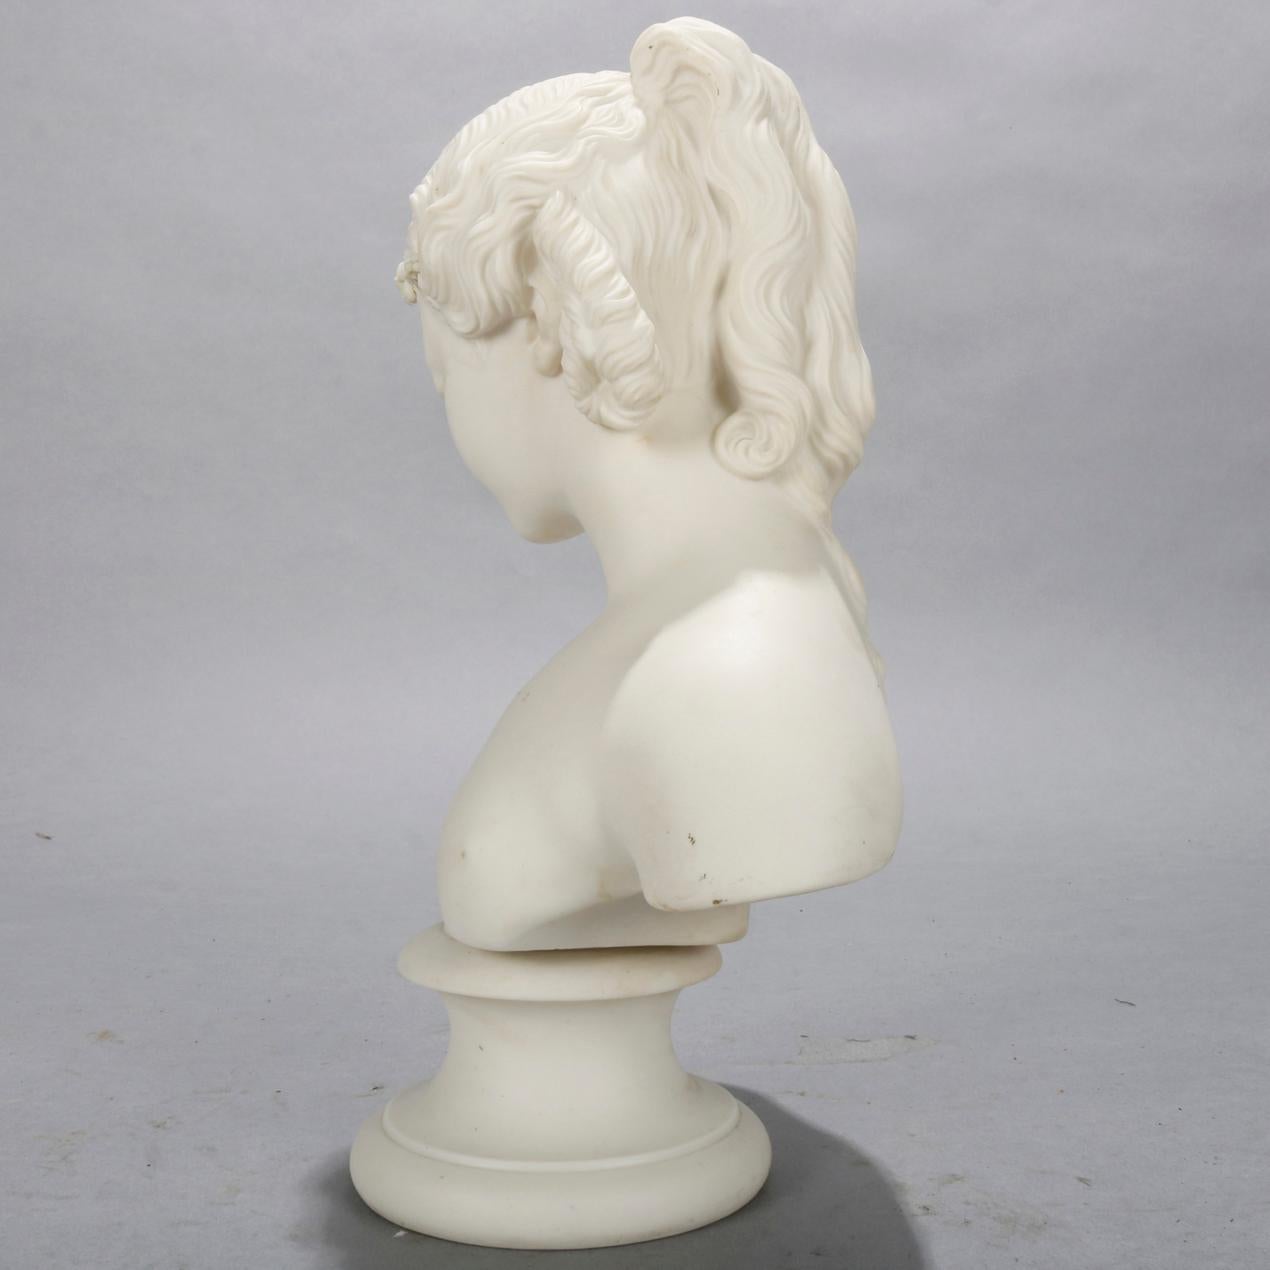 An antique classical Greek parian sculpture bust by Copeland depicts portrait of young woman on plinth, en verso stamped as photographed, circa 1890

Measures: 10.5